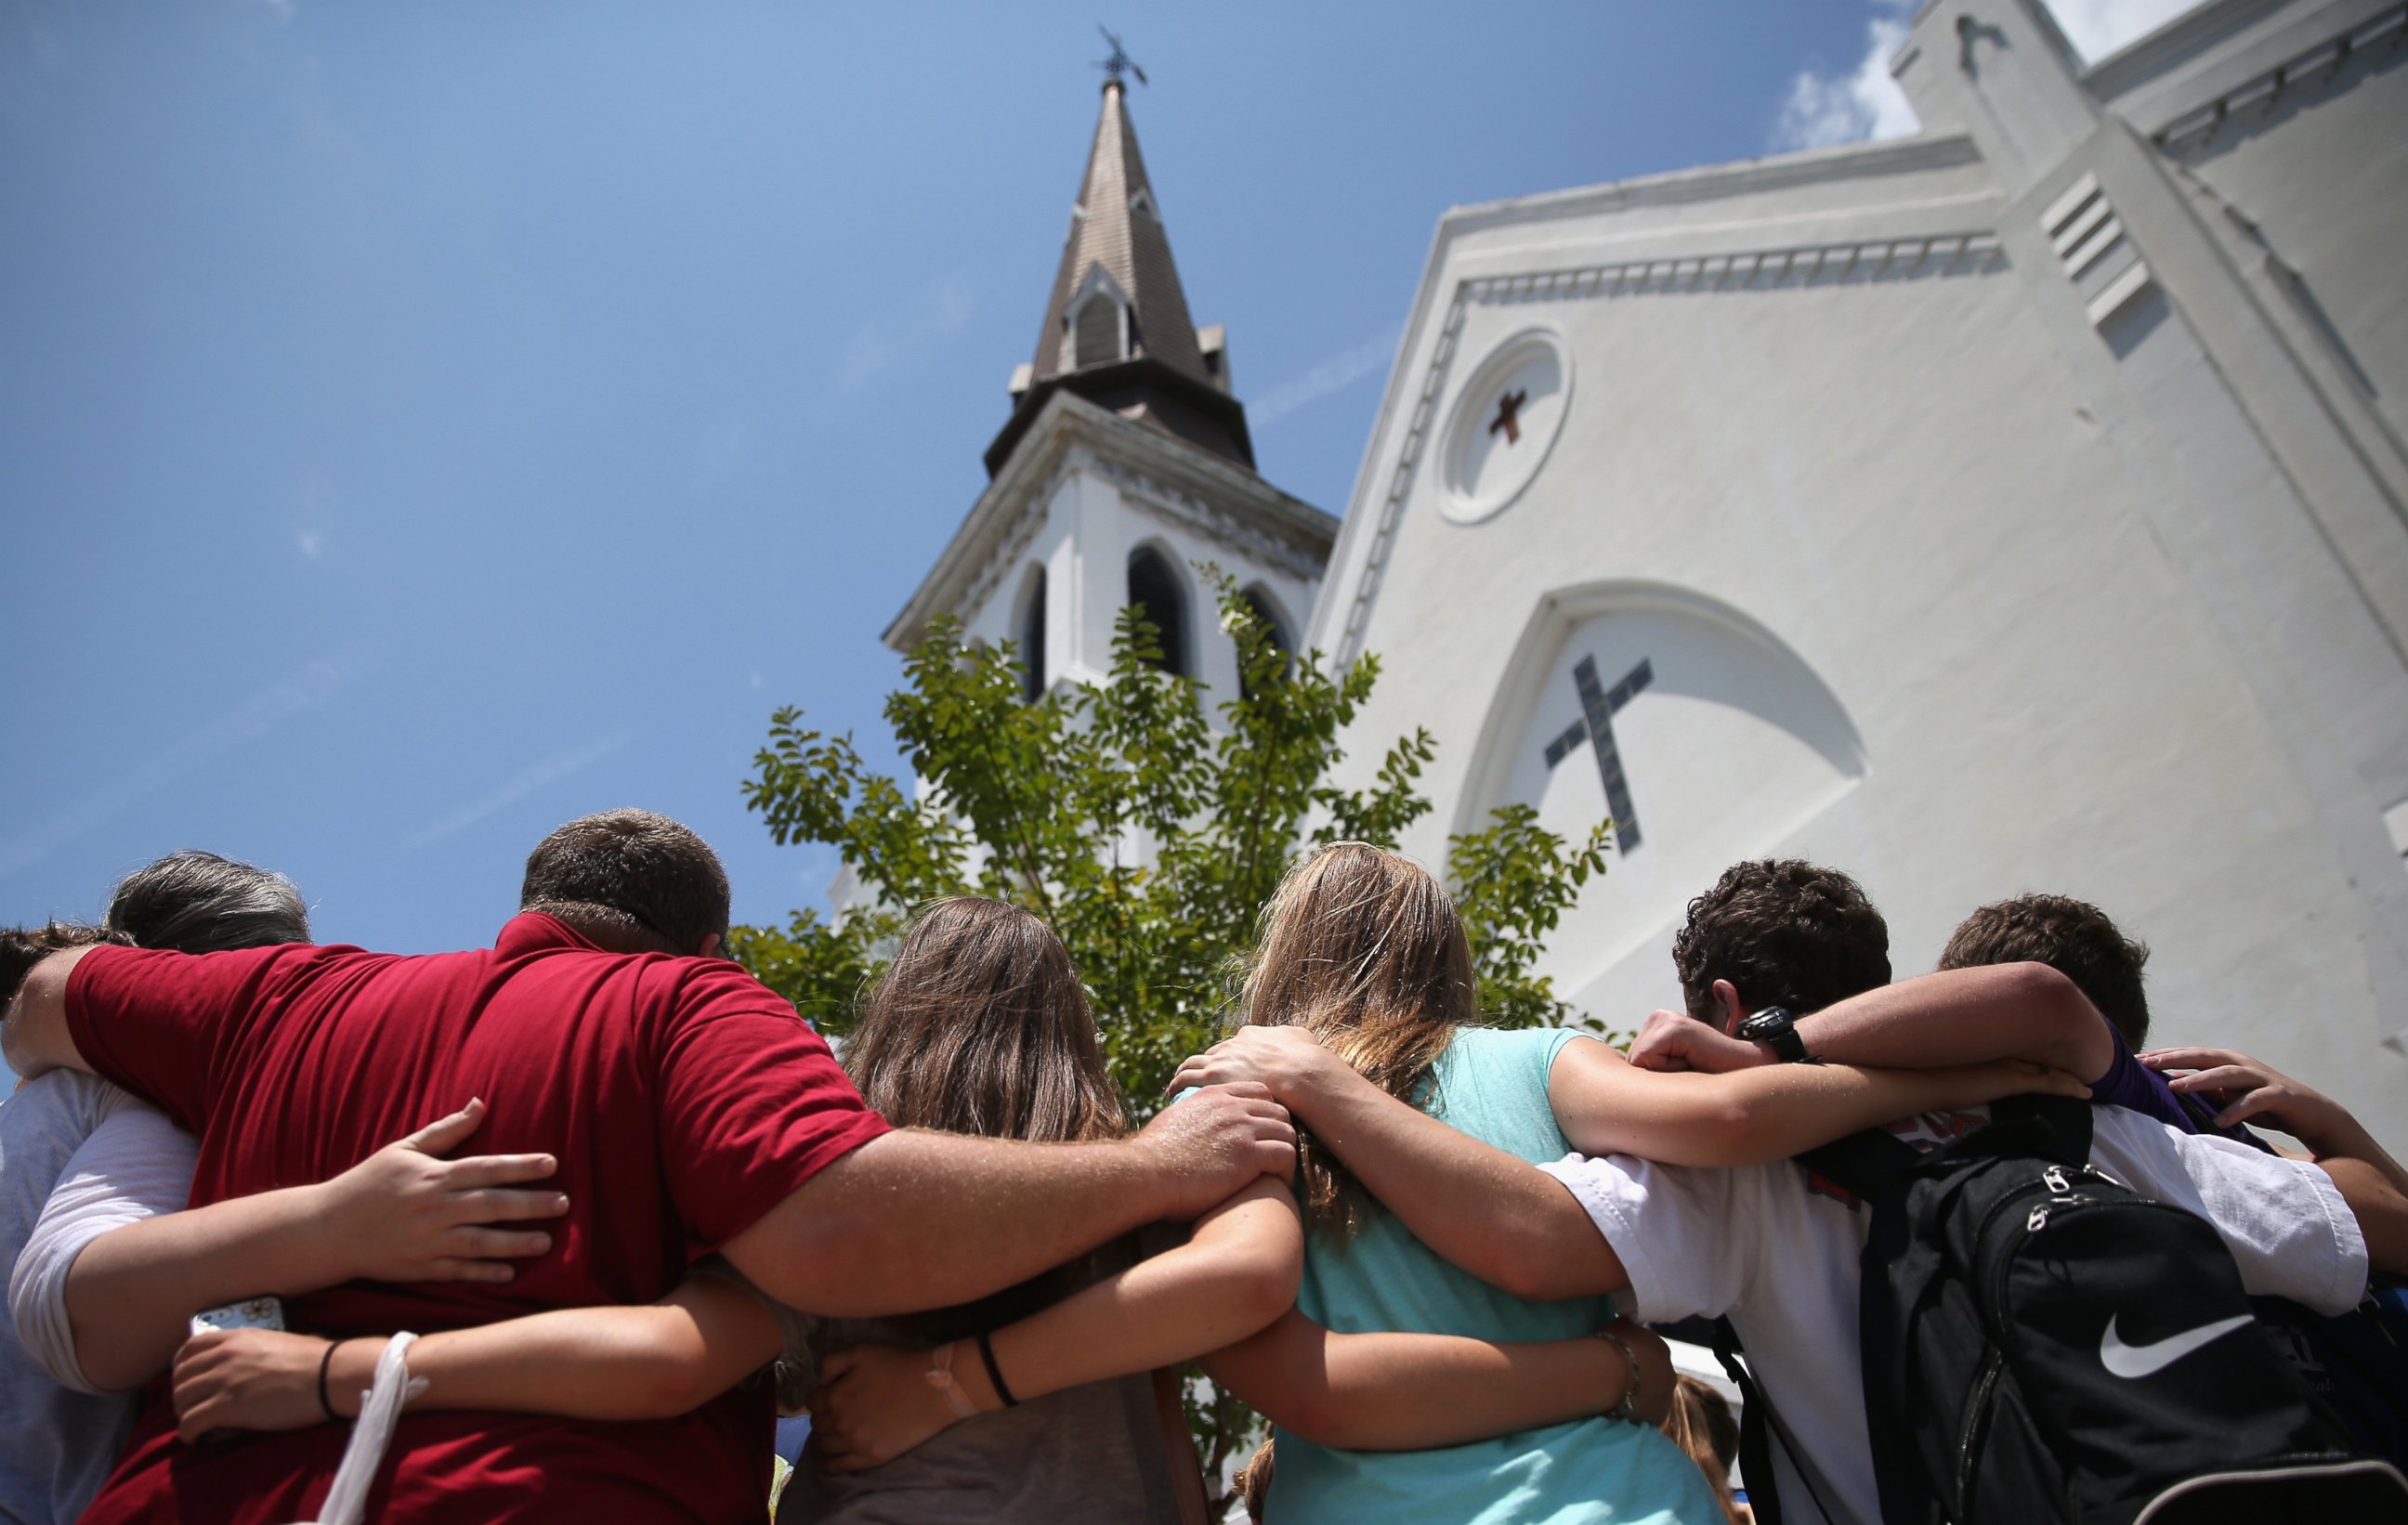 PHOTO: A church youth group from Dothan, Alabama prays in front of the Emanuel AME Church on the one-month anniversary of the mass shooting, July 17, 2015, in Charleston, South Carolina.